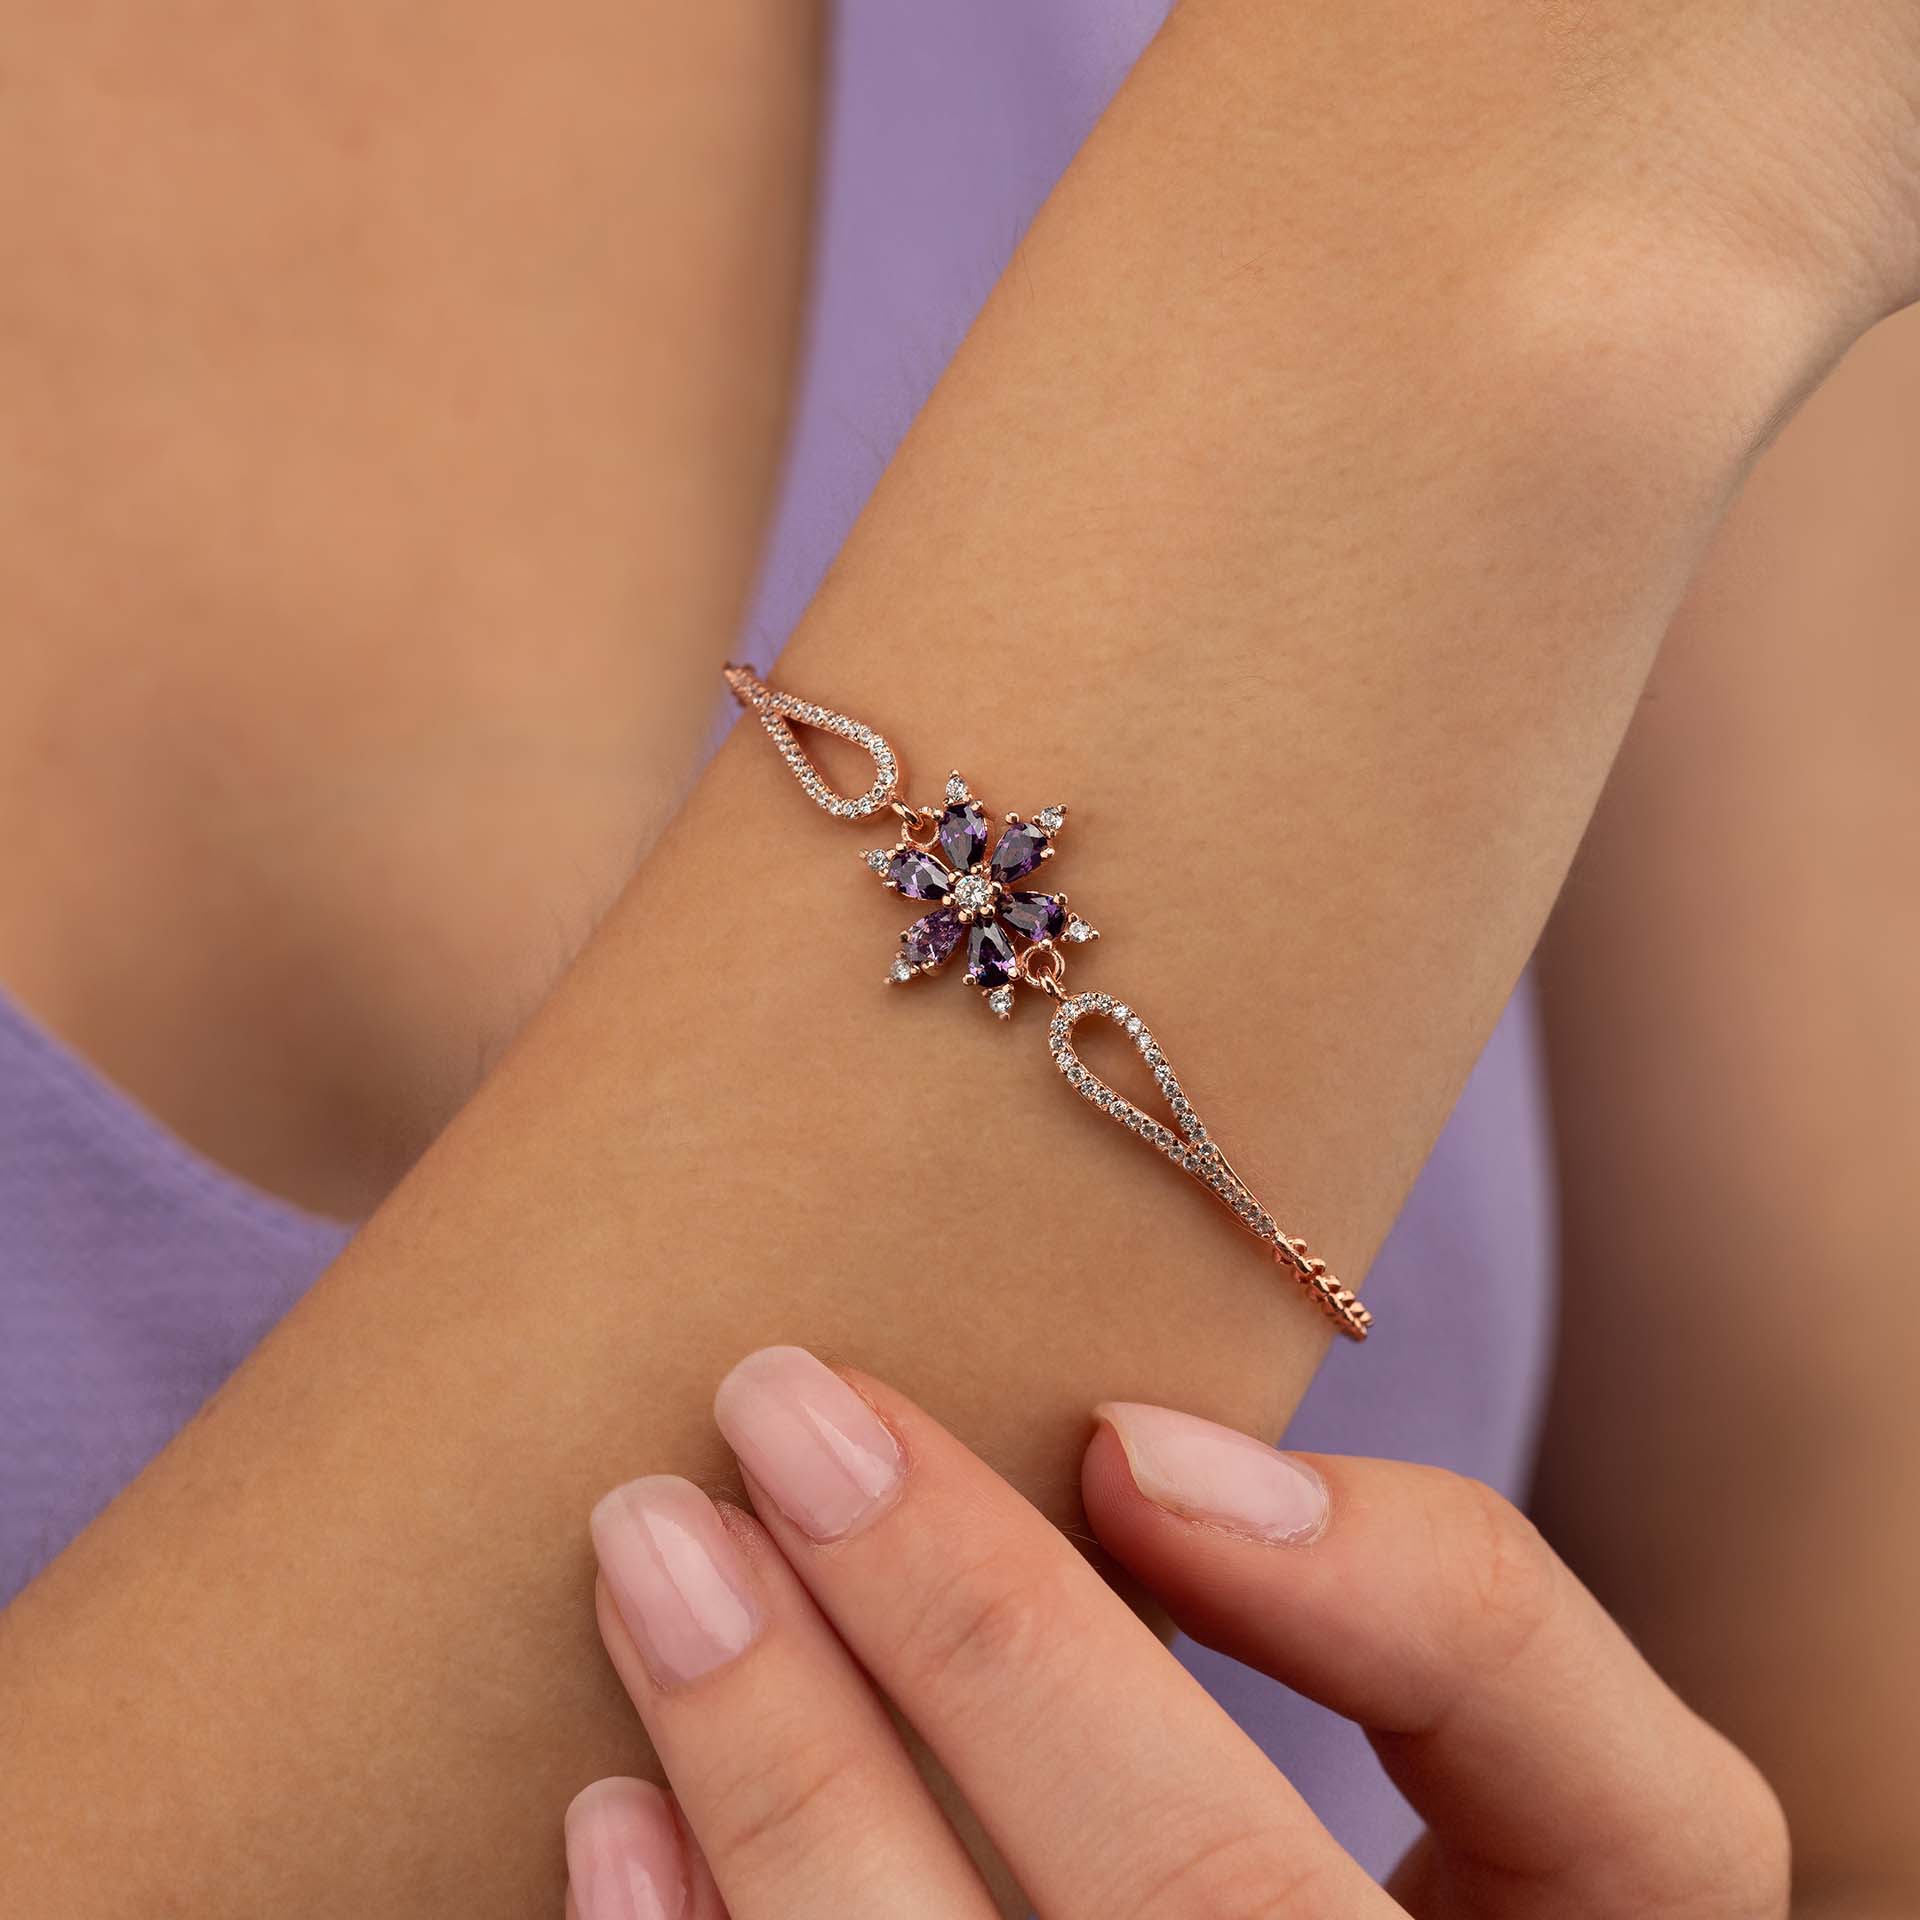 Aster Flower Silver Bracelet with Amethyst Stone - Thumbnail